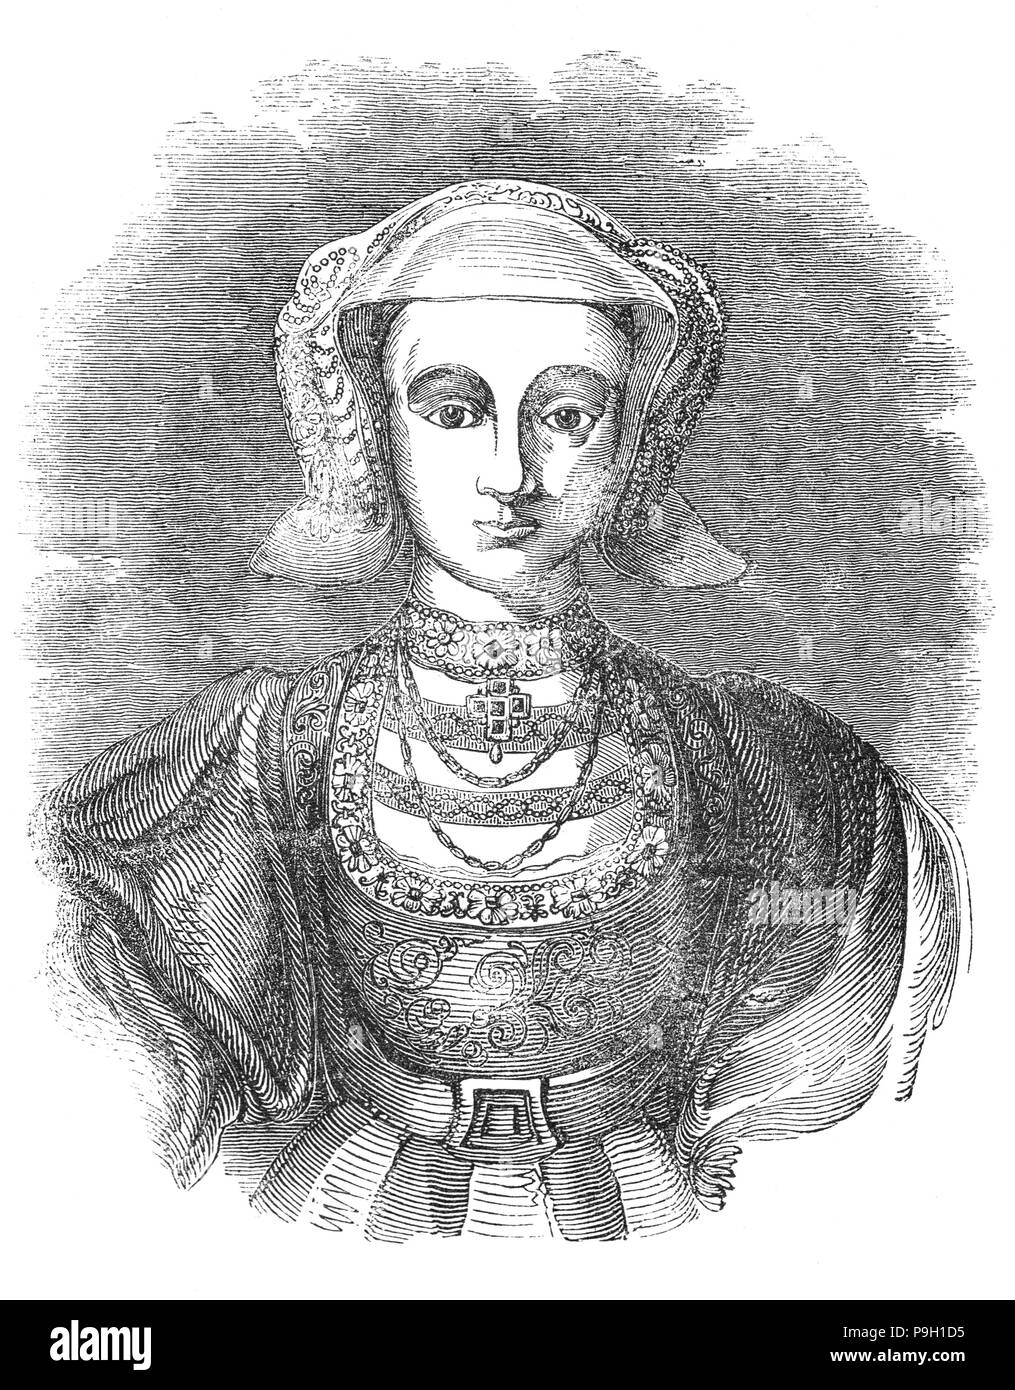 A portrait of Anne of Cleves (1515 – 1557), Queen of England from 6 January to 9 July 1540 as the fourth wife of King Henry VIII. The marriage was declared unconsummated and, as a result, she was not crowned queen consort. Following the annulment, she was given a generous settlement by the King, and thereafter referred to as the King's Beloved Sister.  She lived to see the coronation of Queen Mary I, outliving the rest of Henry's wives. Stock Photo